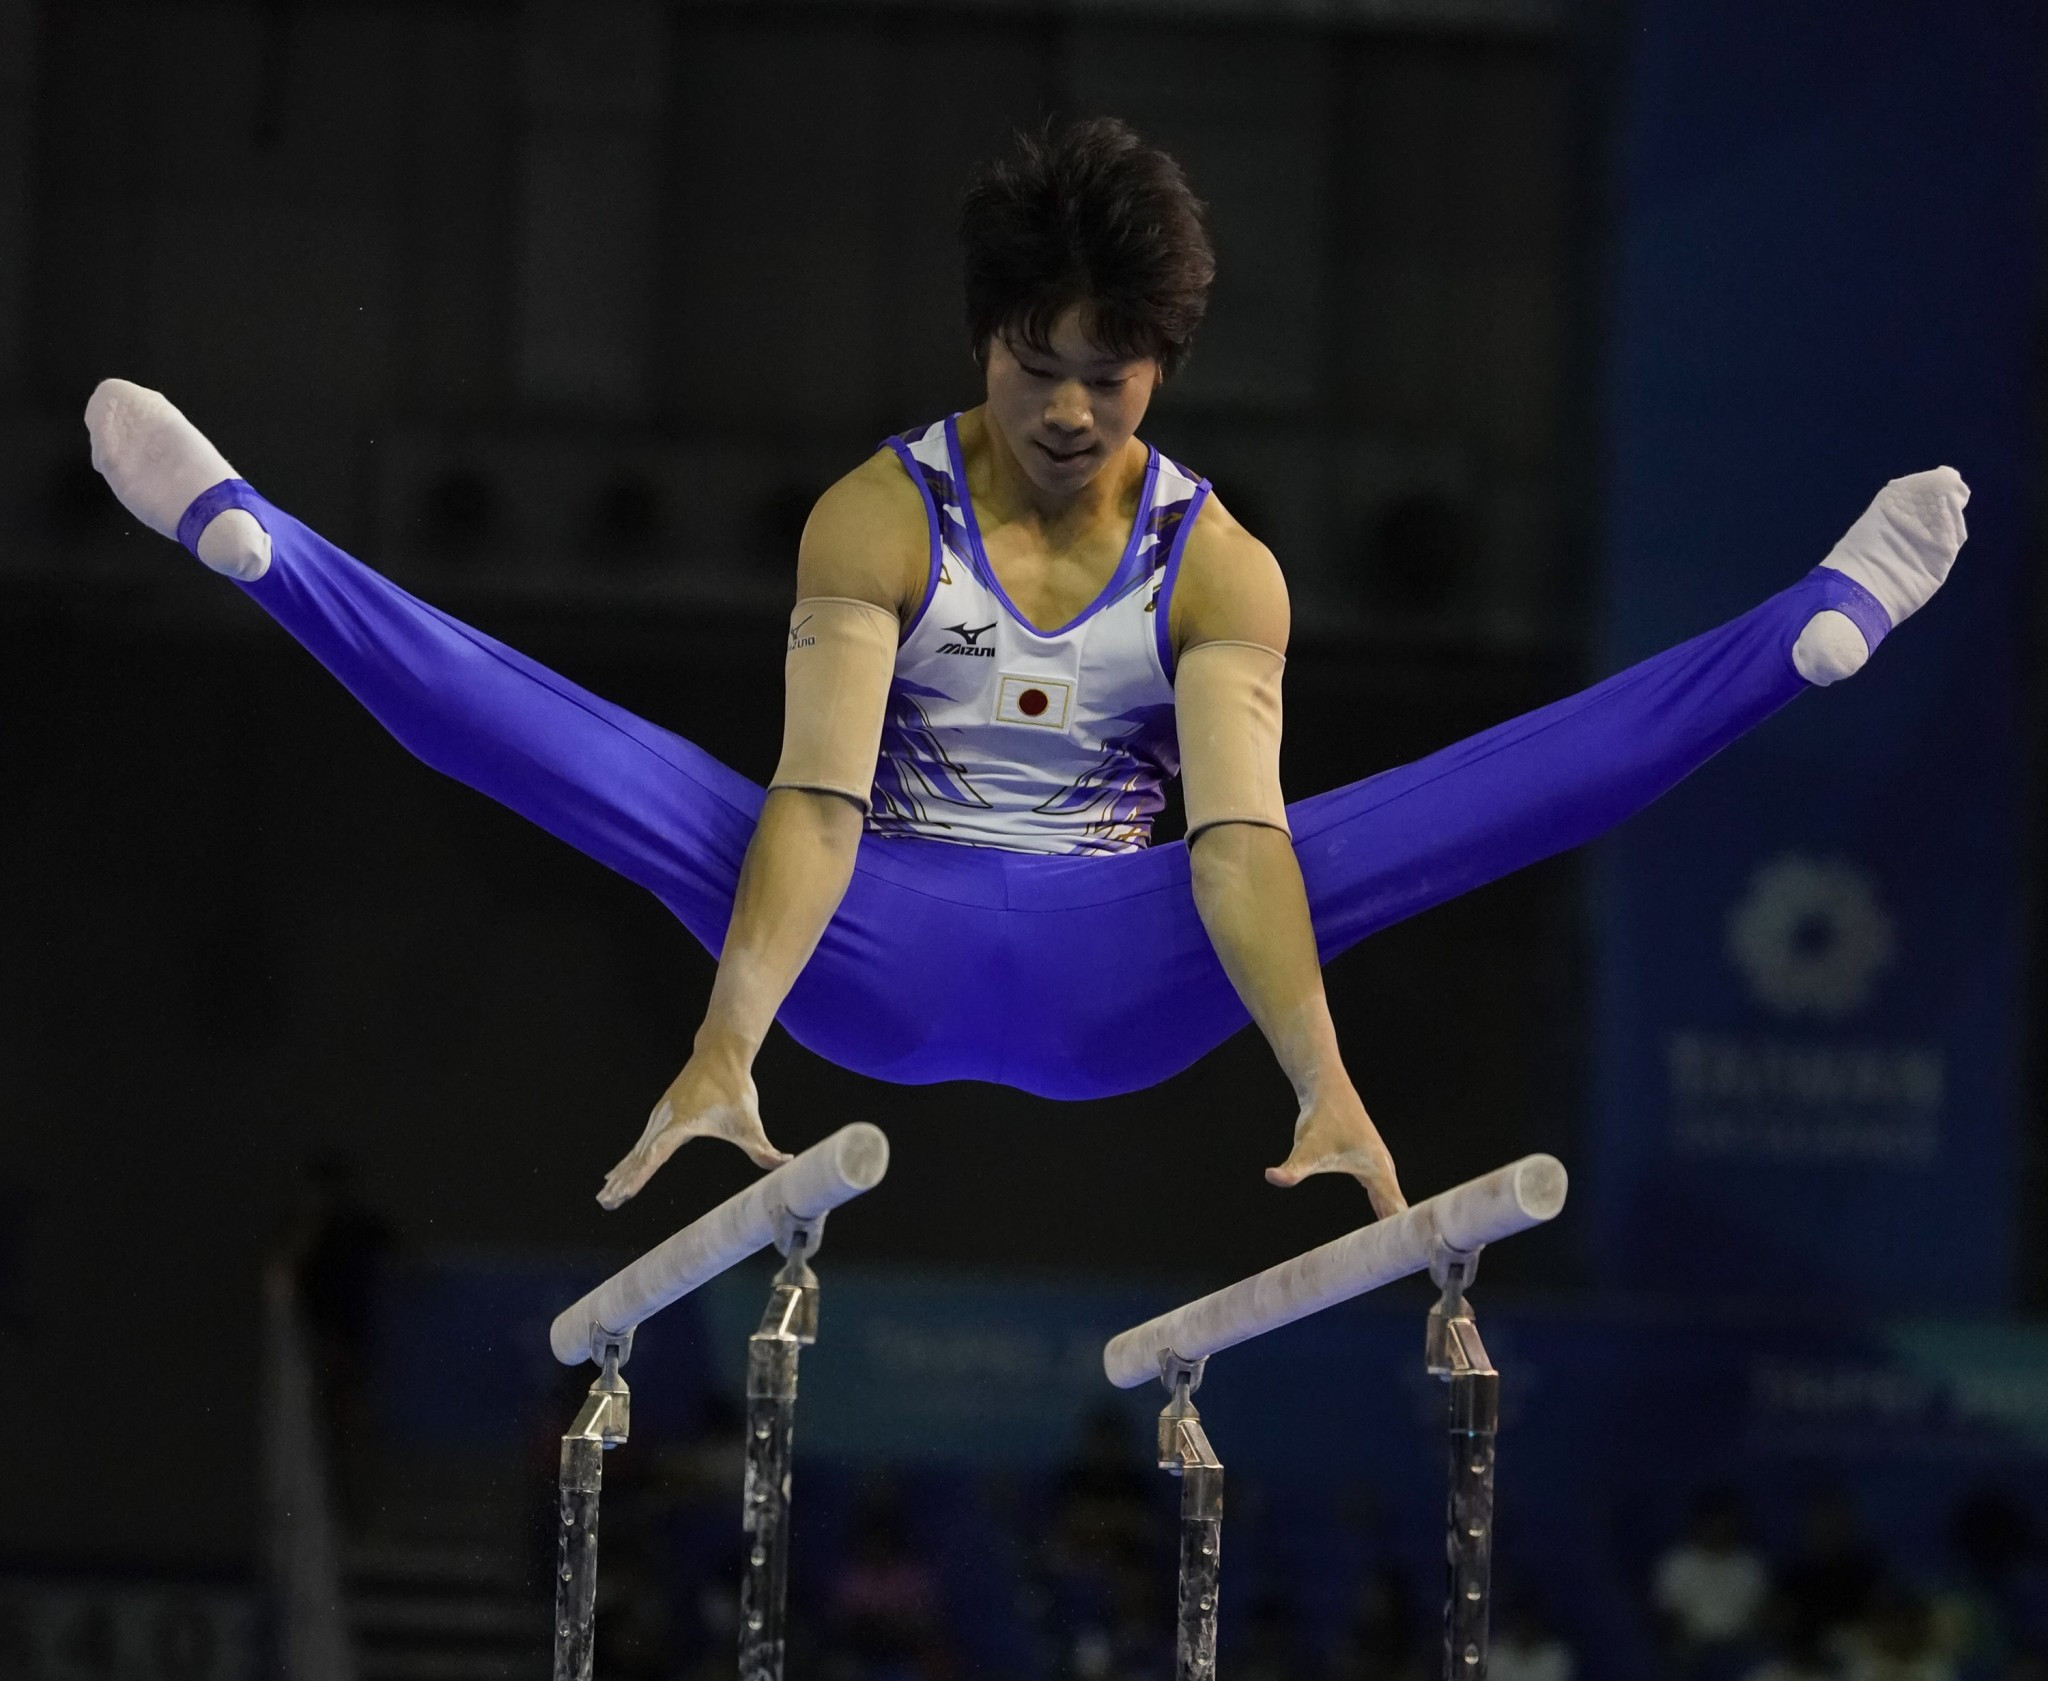 All 10 gymnastics golds on offer were won by different athletes ©Taipei 2017